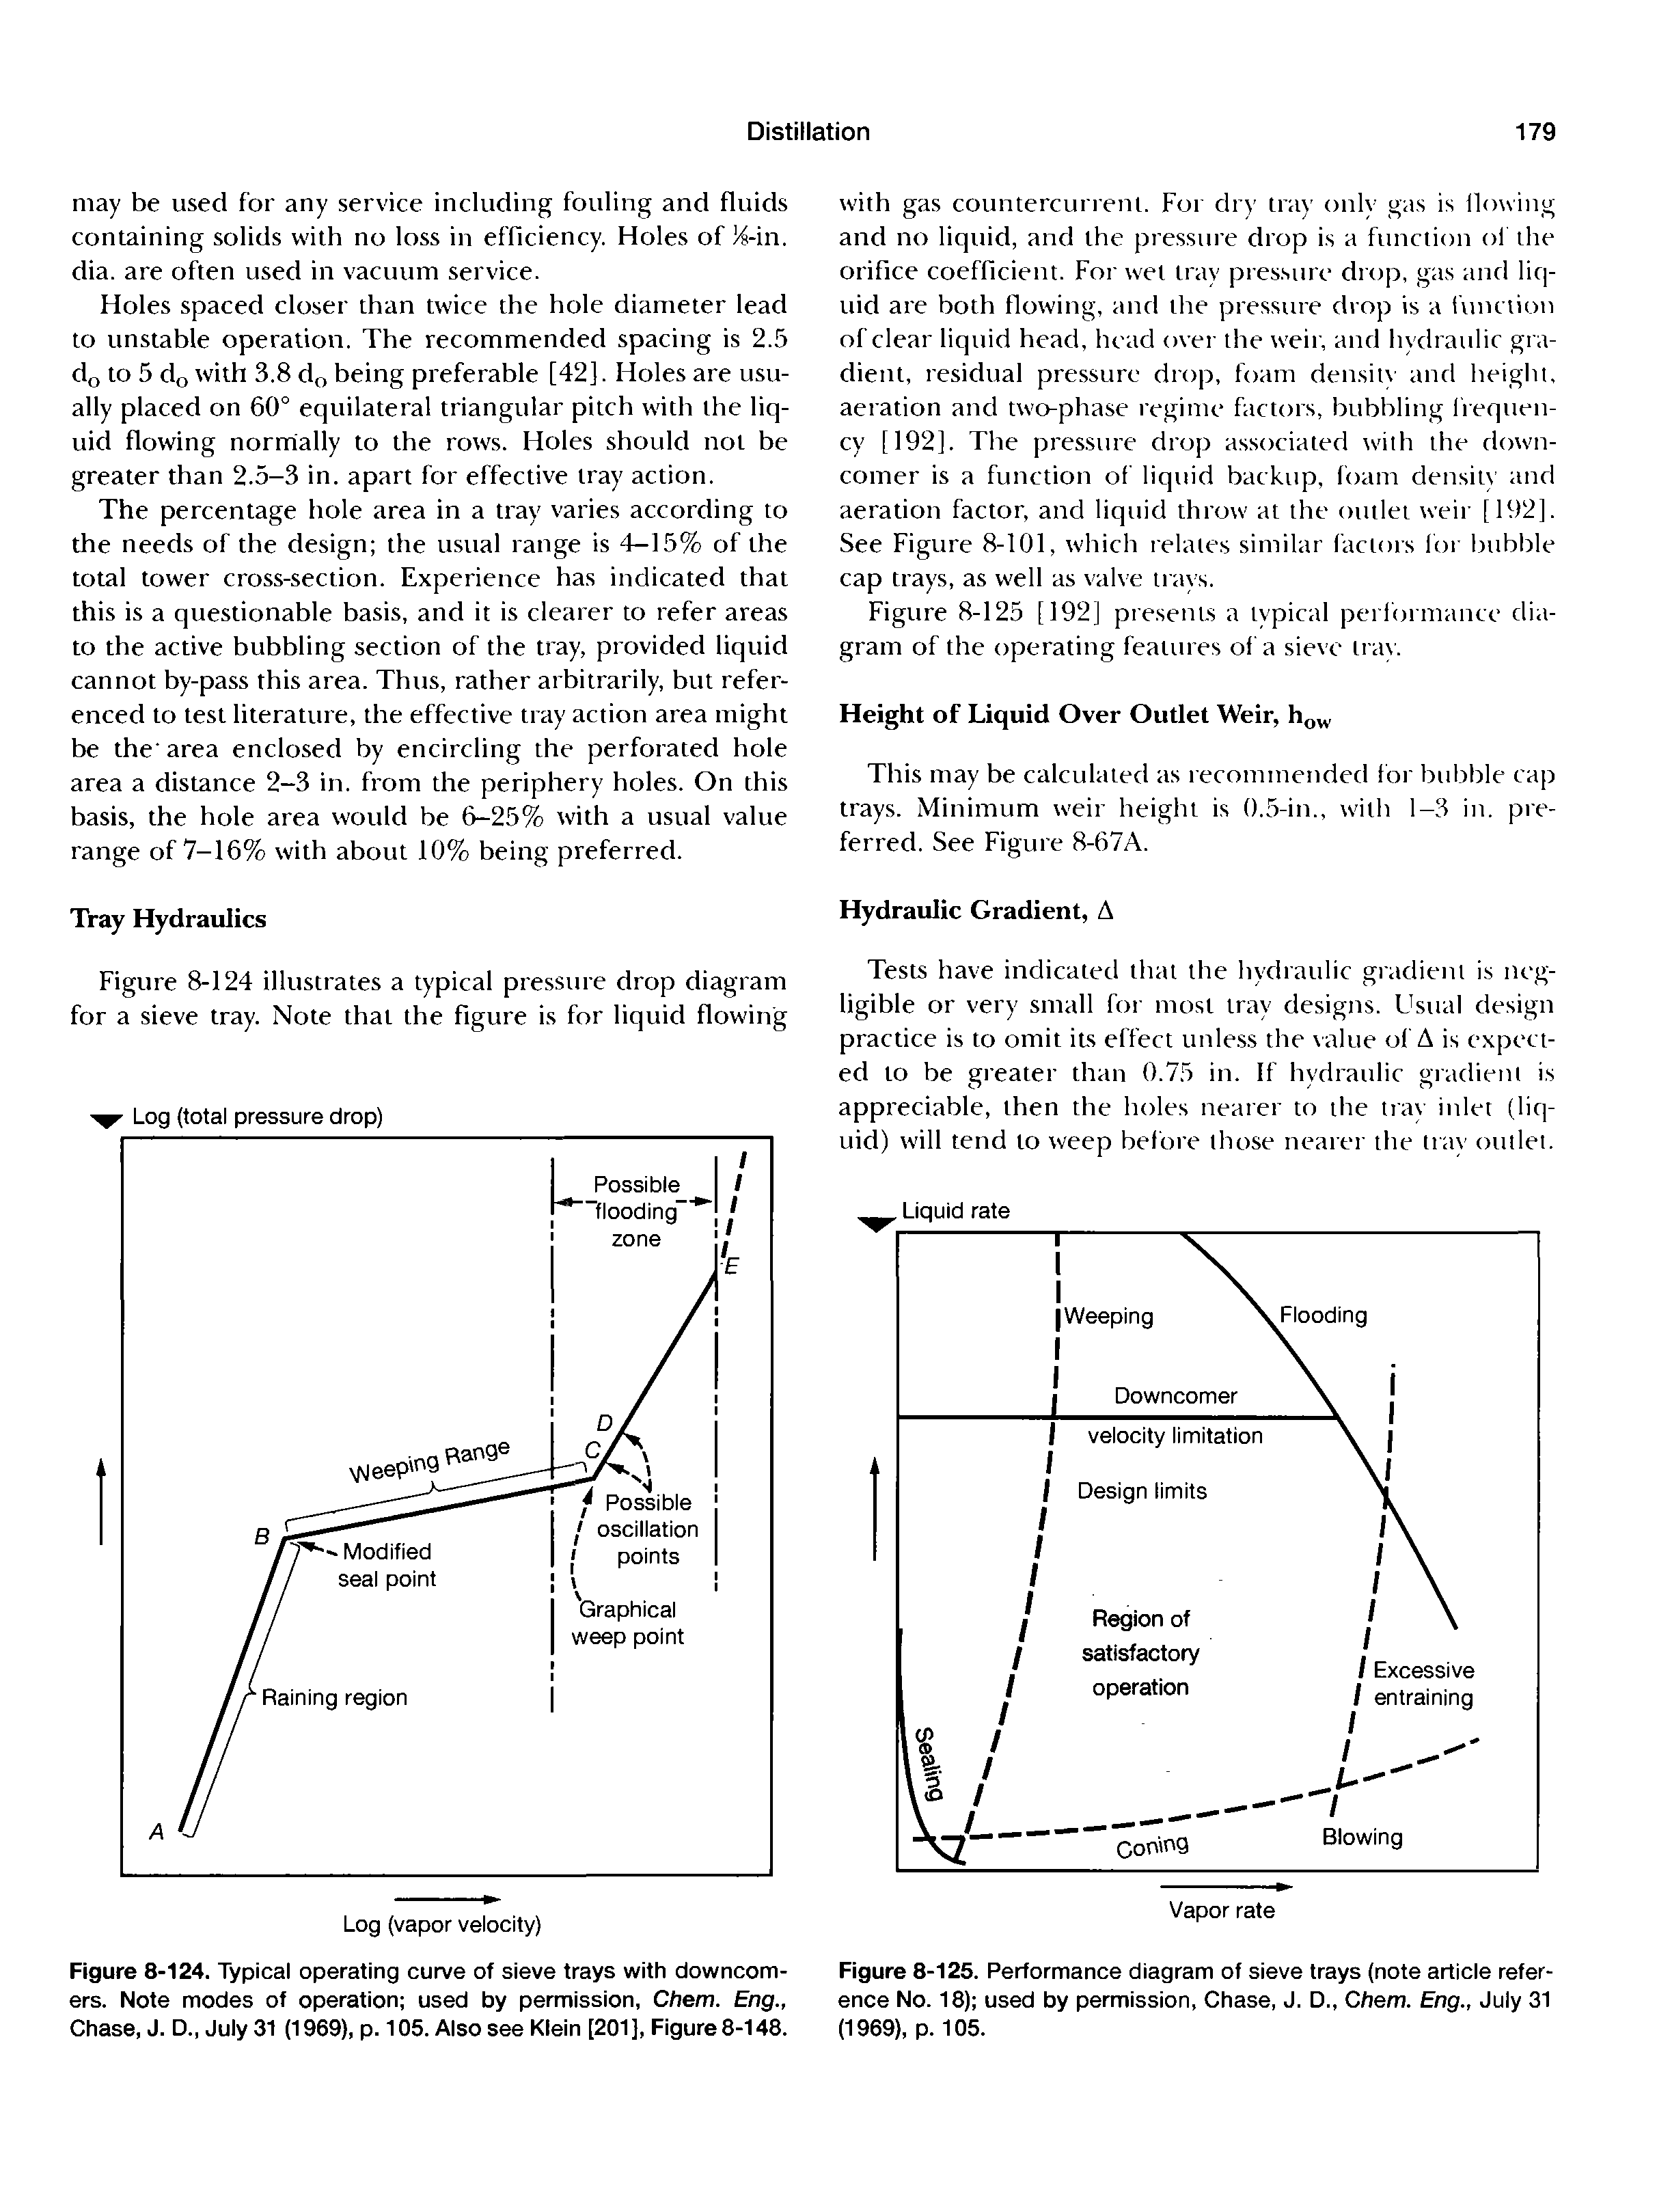 Figure 8-124. Typical operating curve of sieve trays with downcomers. Note modes of operation used by permission, Chem. Eng., Chase, J. D., July 31 (1969), p. 105. Also see Klein [201], Figure 8-148.